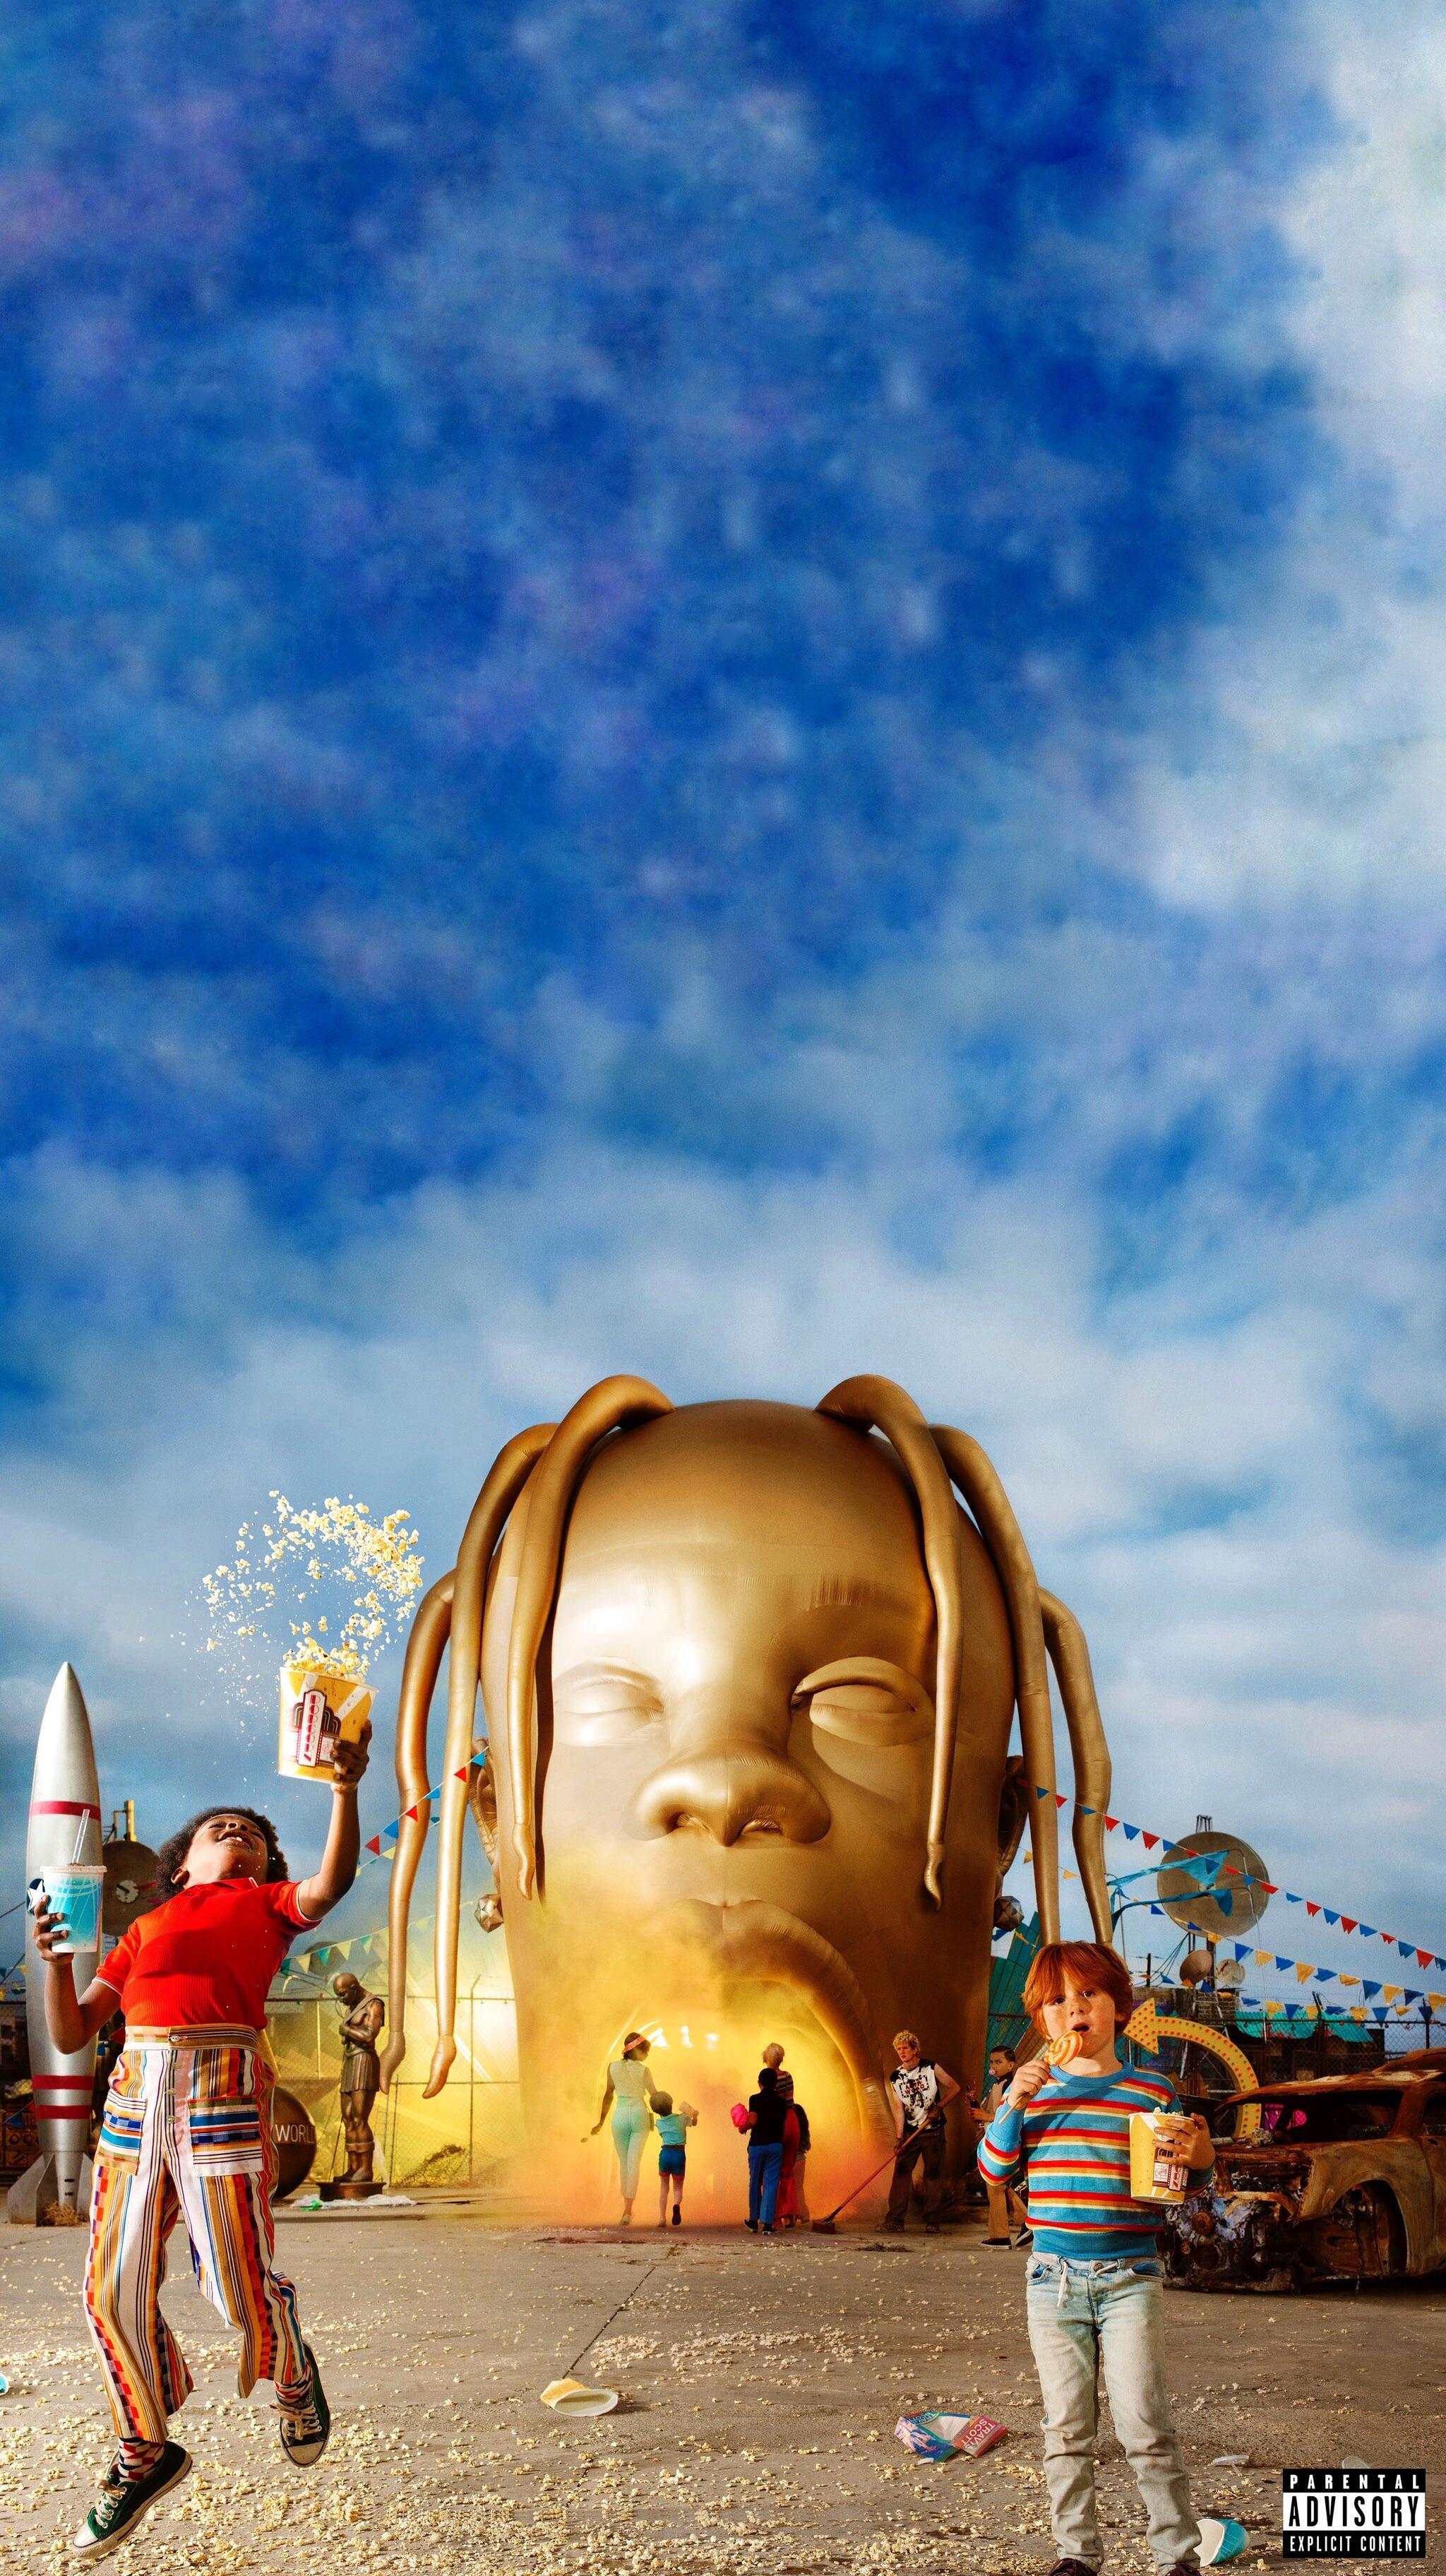 Astroworld Cover as Phone Wallpaper